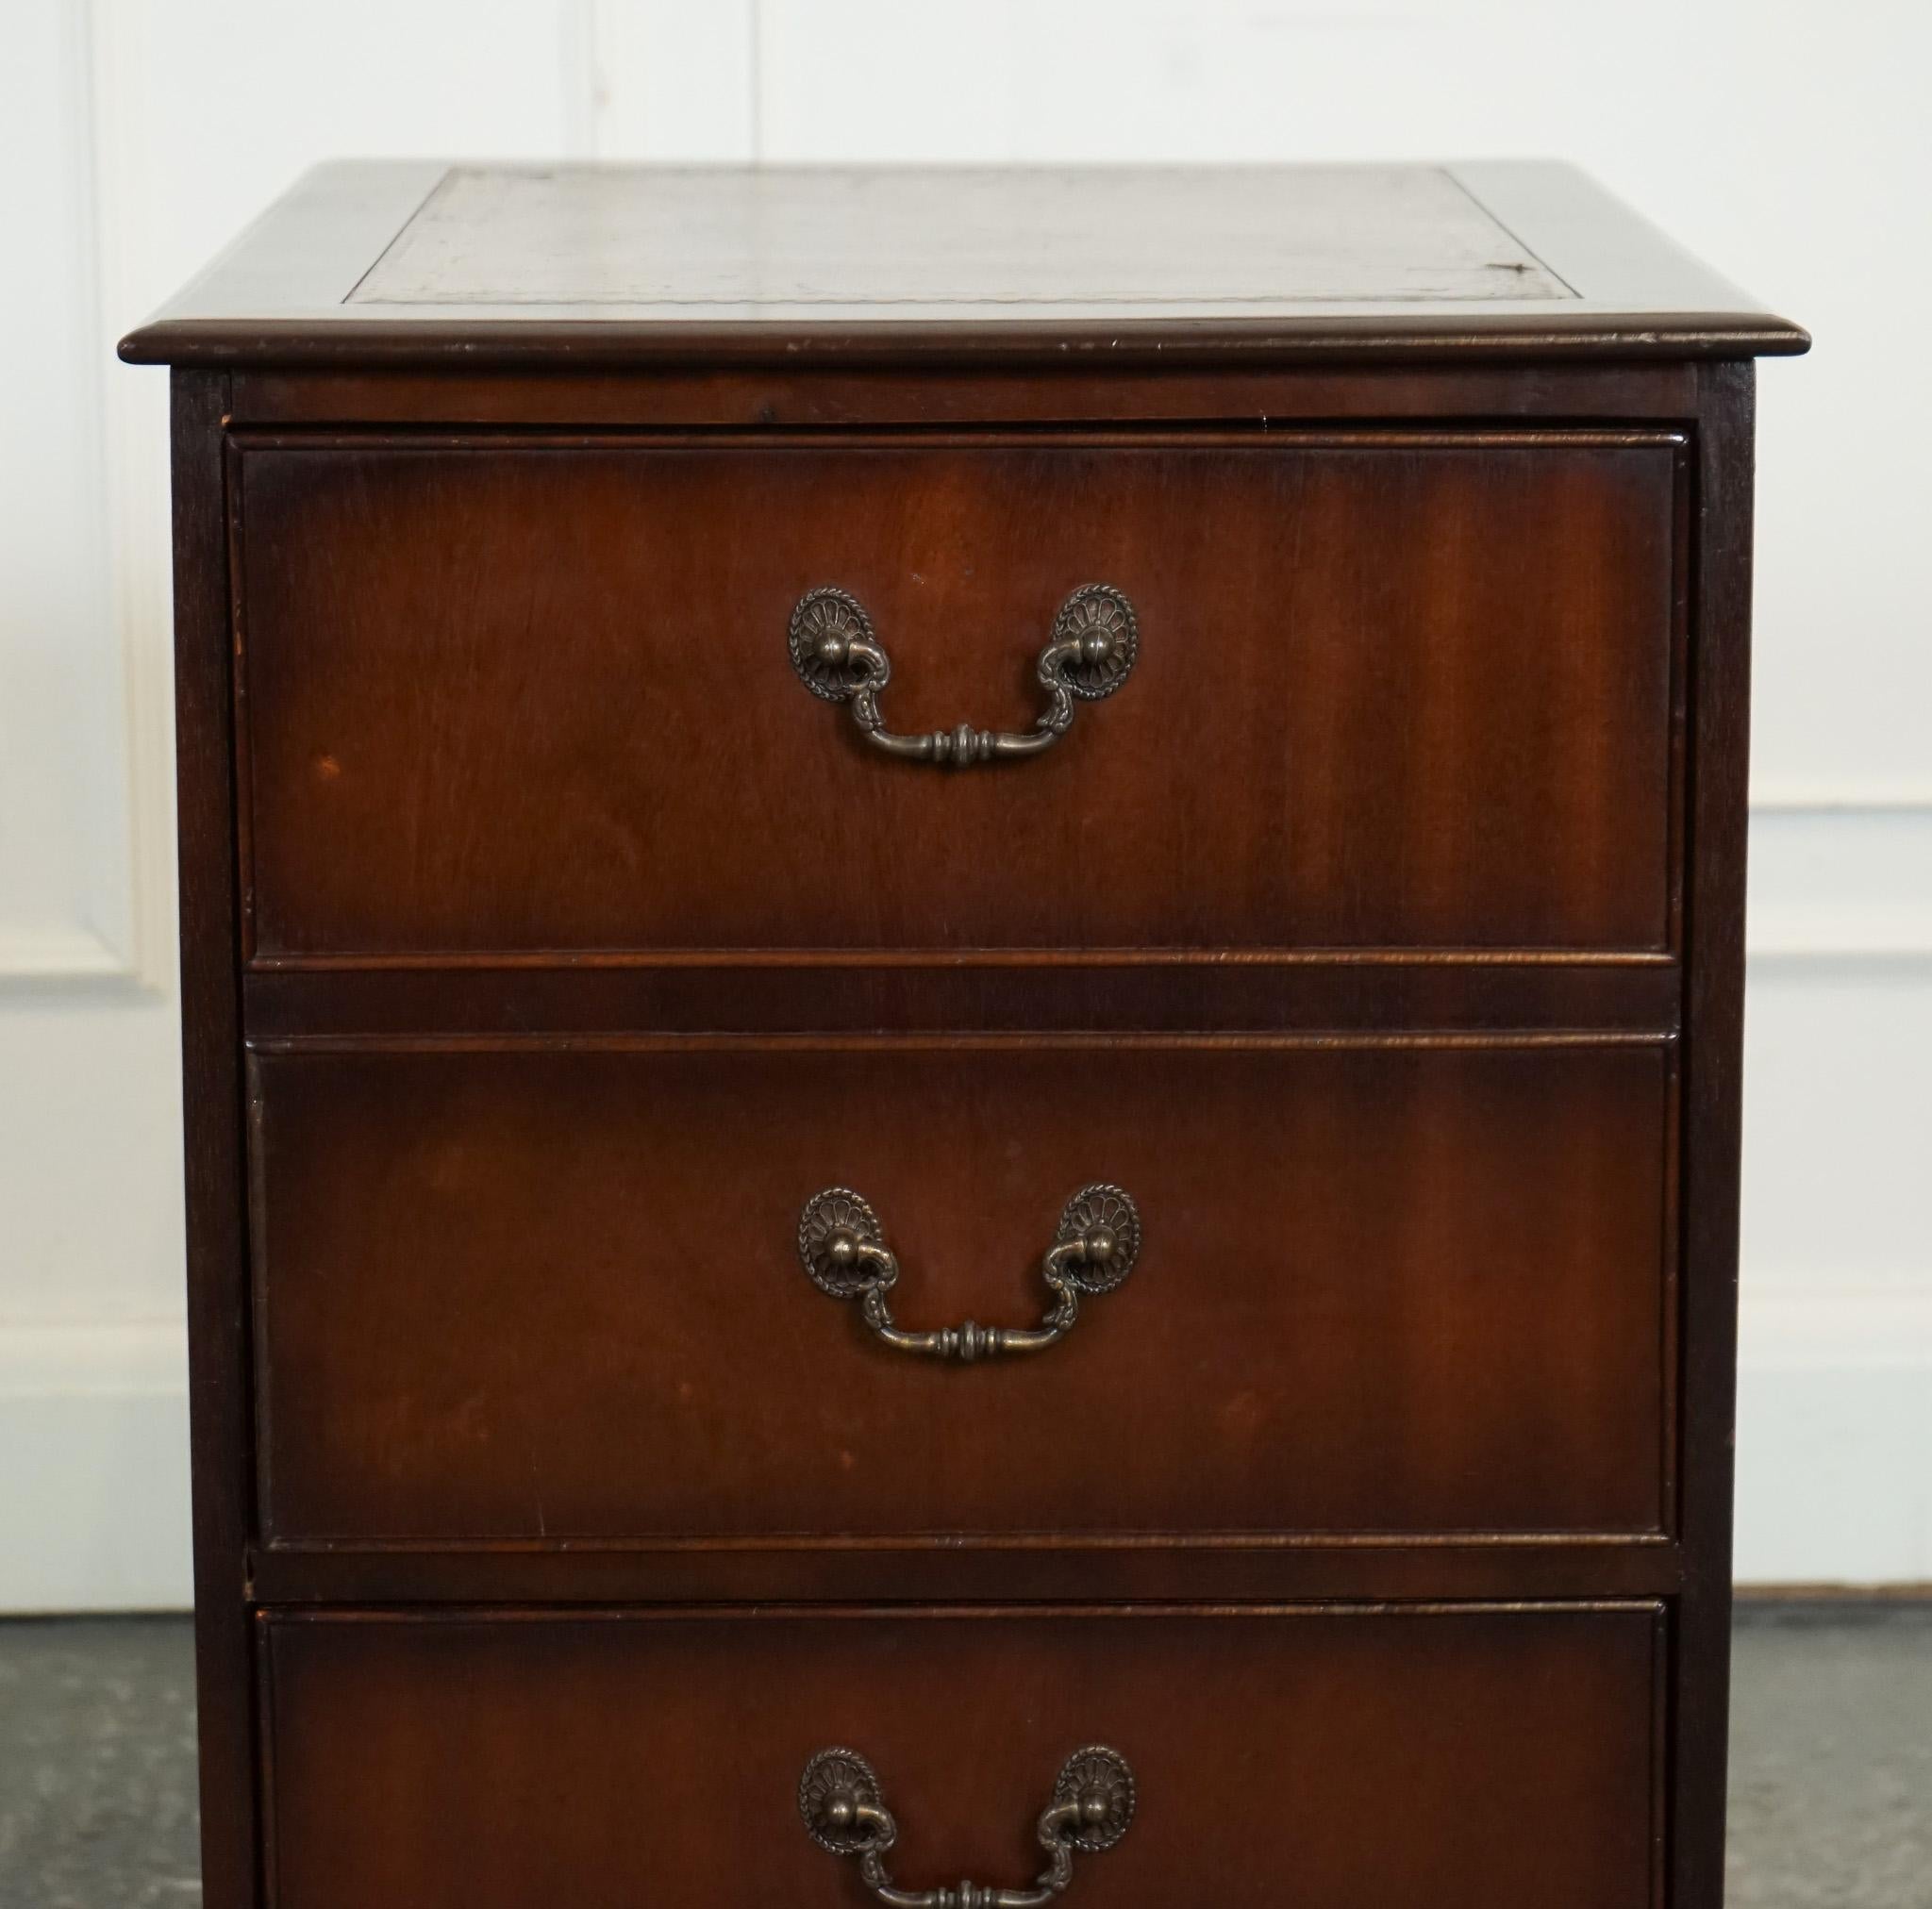 VINTAGE MAHOGANY GOLD EMBOSsed BROWN LEATHER TOP FILLING CABiNET im Zustand „Gut“ im Angebot in Pulborough, GB